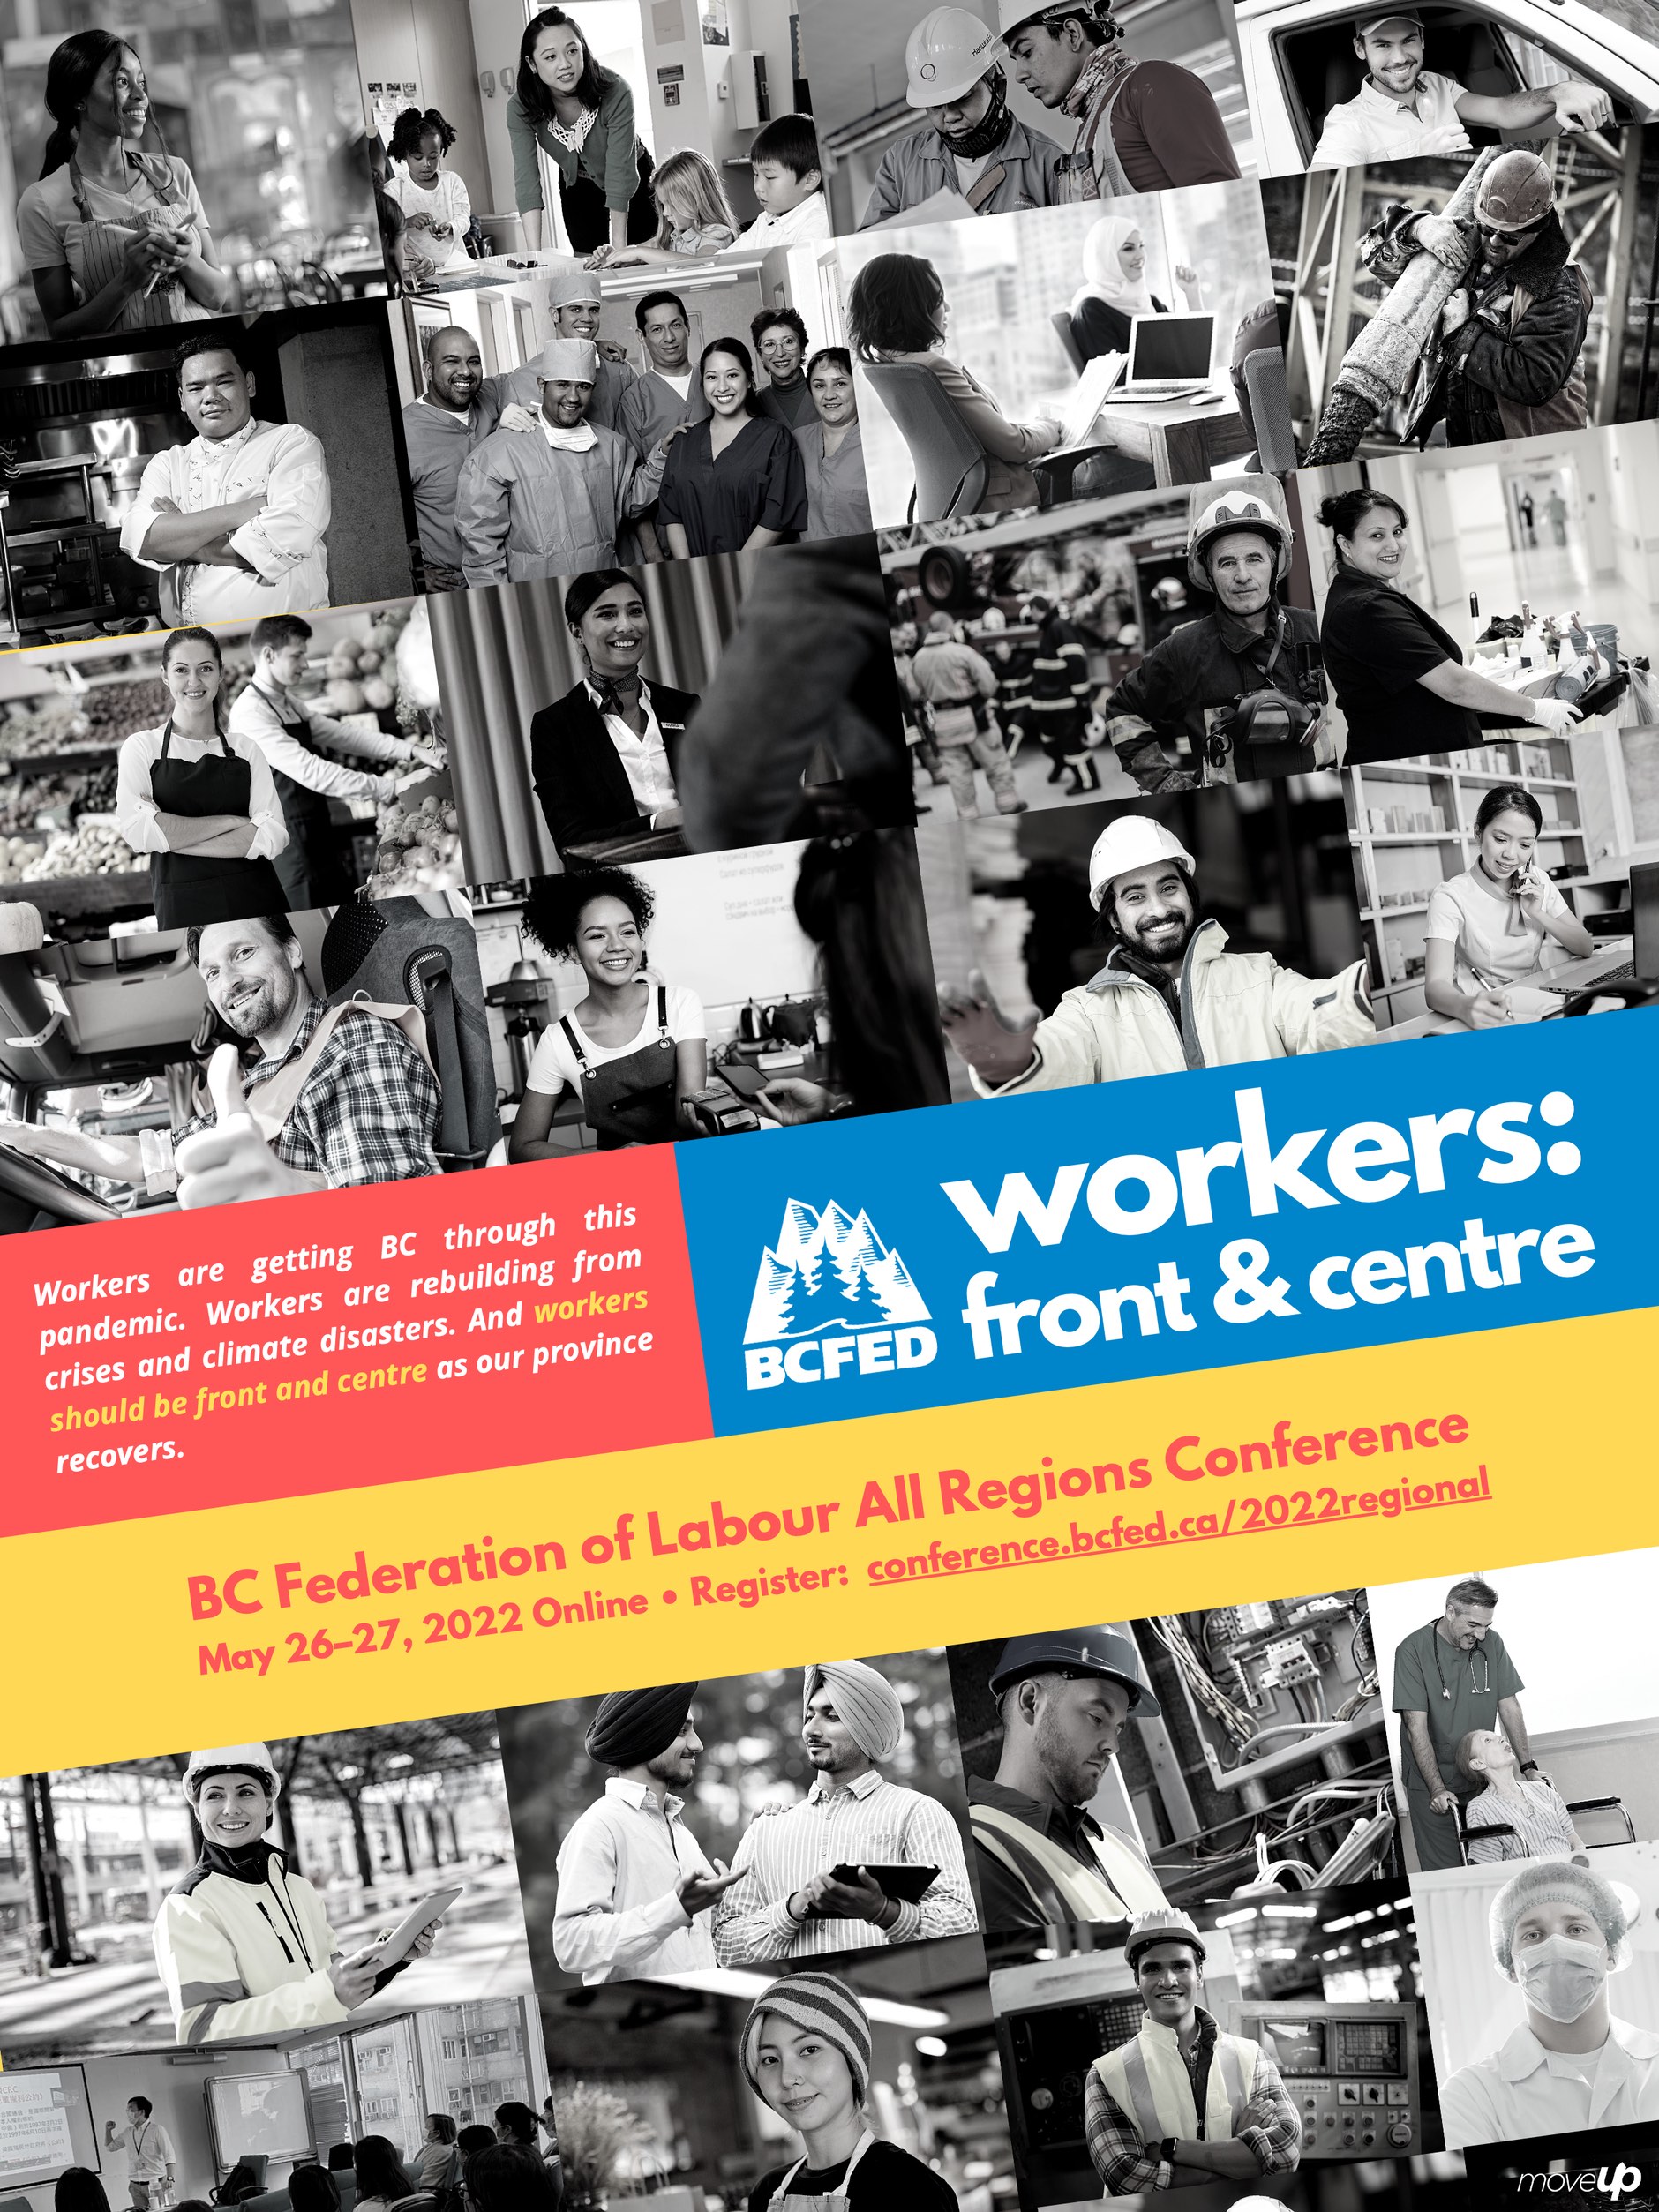 Workers: Front & Centre: BC Federation of Labour All Regions Conference May 26–27, 2022 Online • Register: conference.bcfed.ca/2022regional • Workers are getting BC through this pandemic. Workers are rebuilding from crises and climate disasters. And workers should be front and centre as our province recovers.